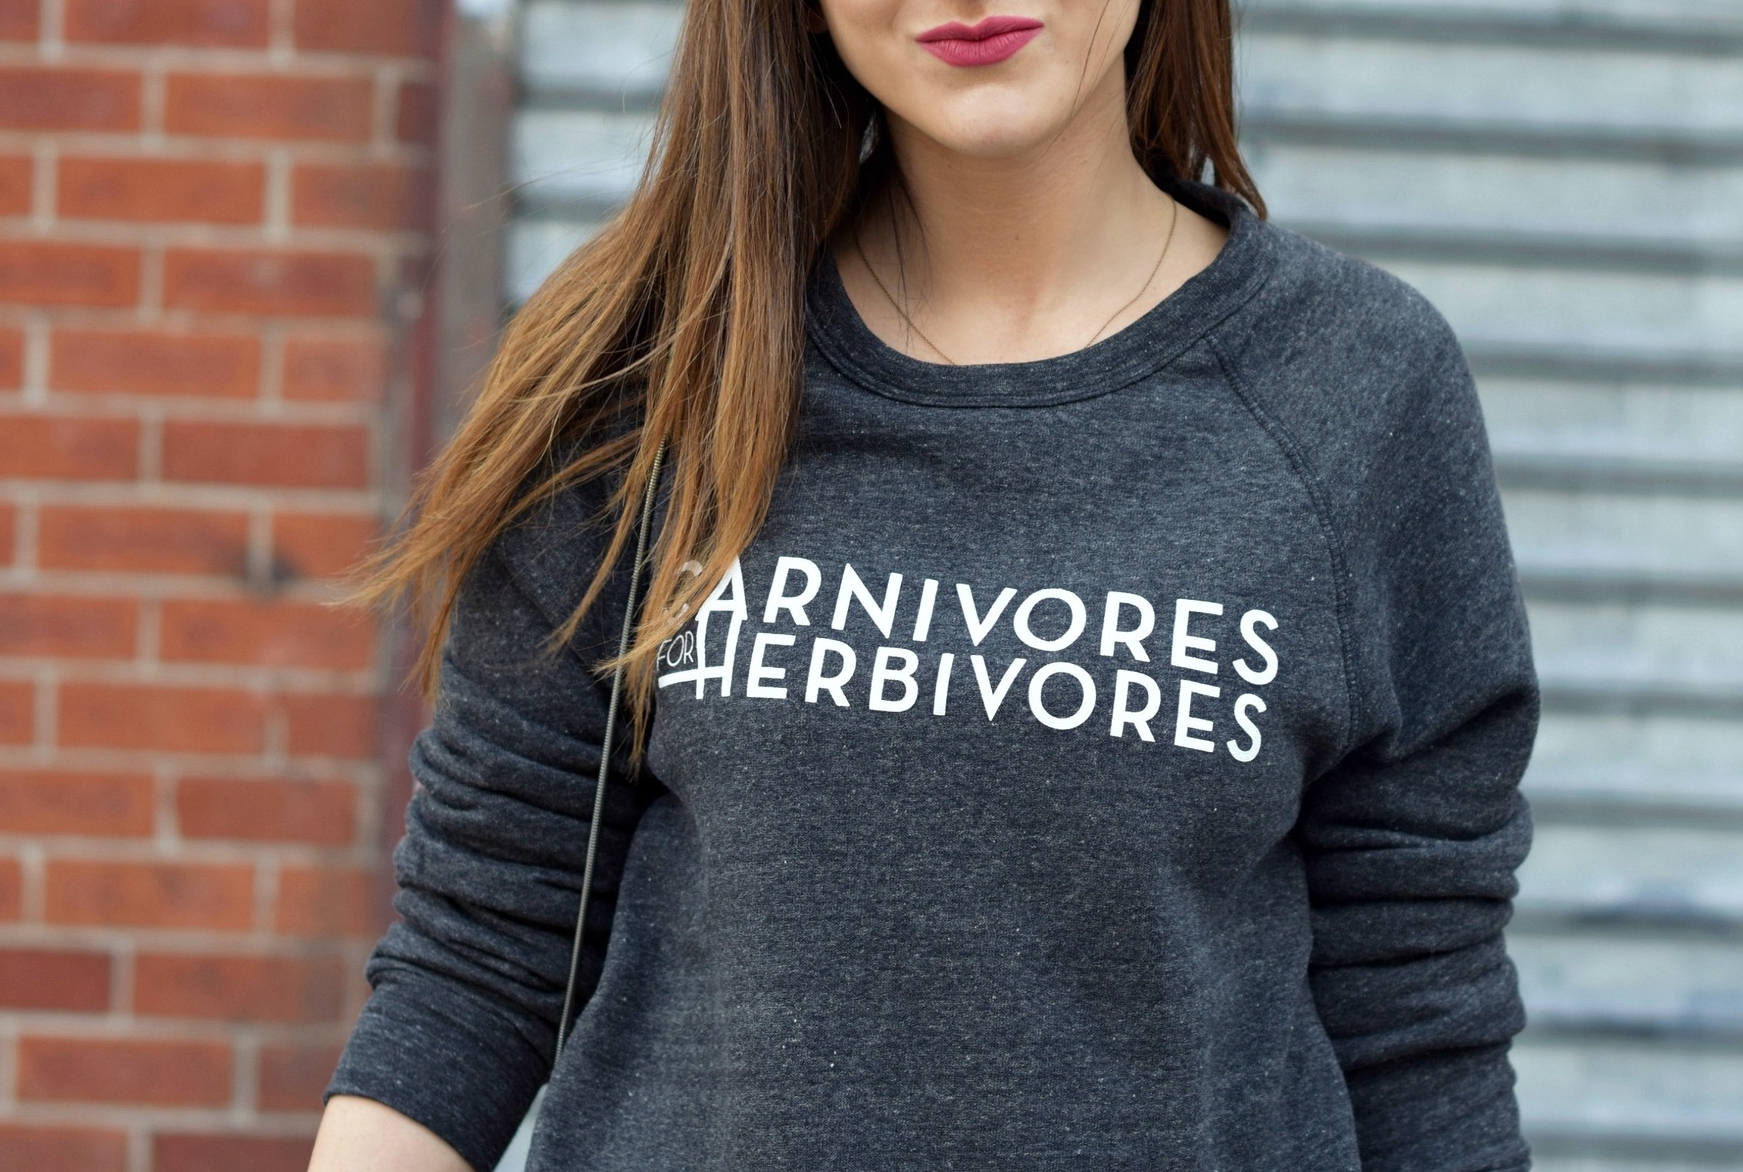 Carnivores For Herbivores Fauxgerty Louboutins & Love Fashion Blog Esther Santer NYC Street Style Blogger Animal Lover Cruelty Free Suede Vegan Leather RayBan Aviators Sunglasses Grey Sweatshirt Lace Skirt Girl Women Outfit OOTD USA Outerwear Shop.jpg